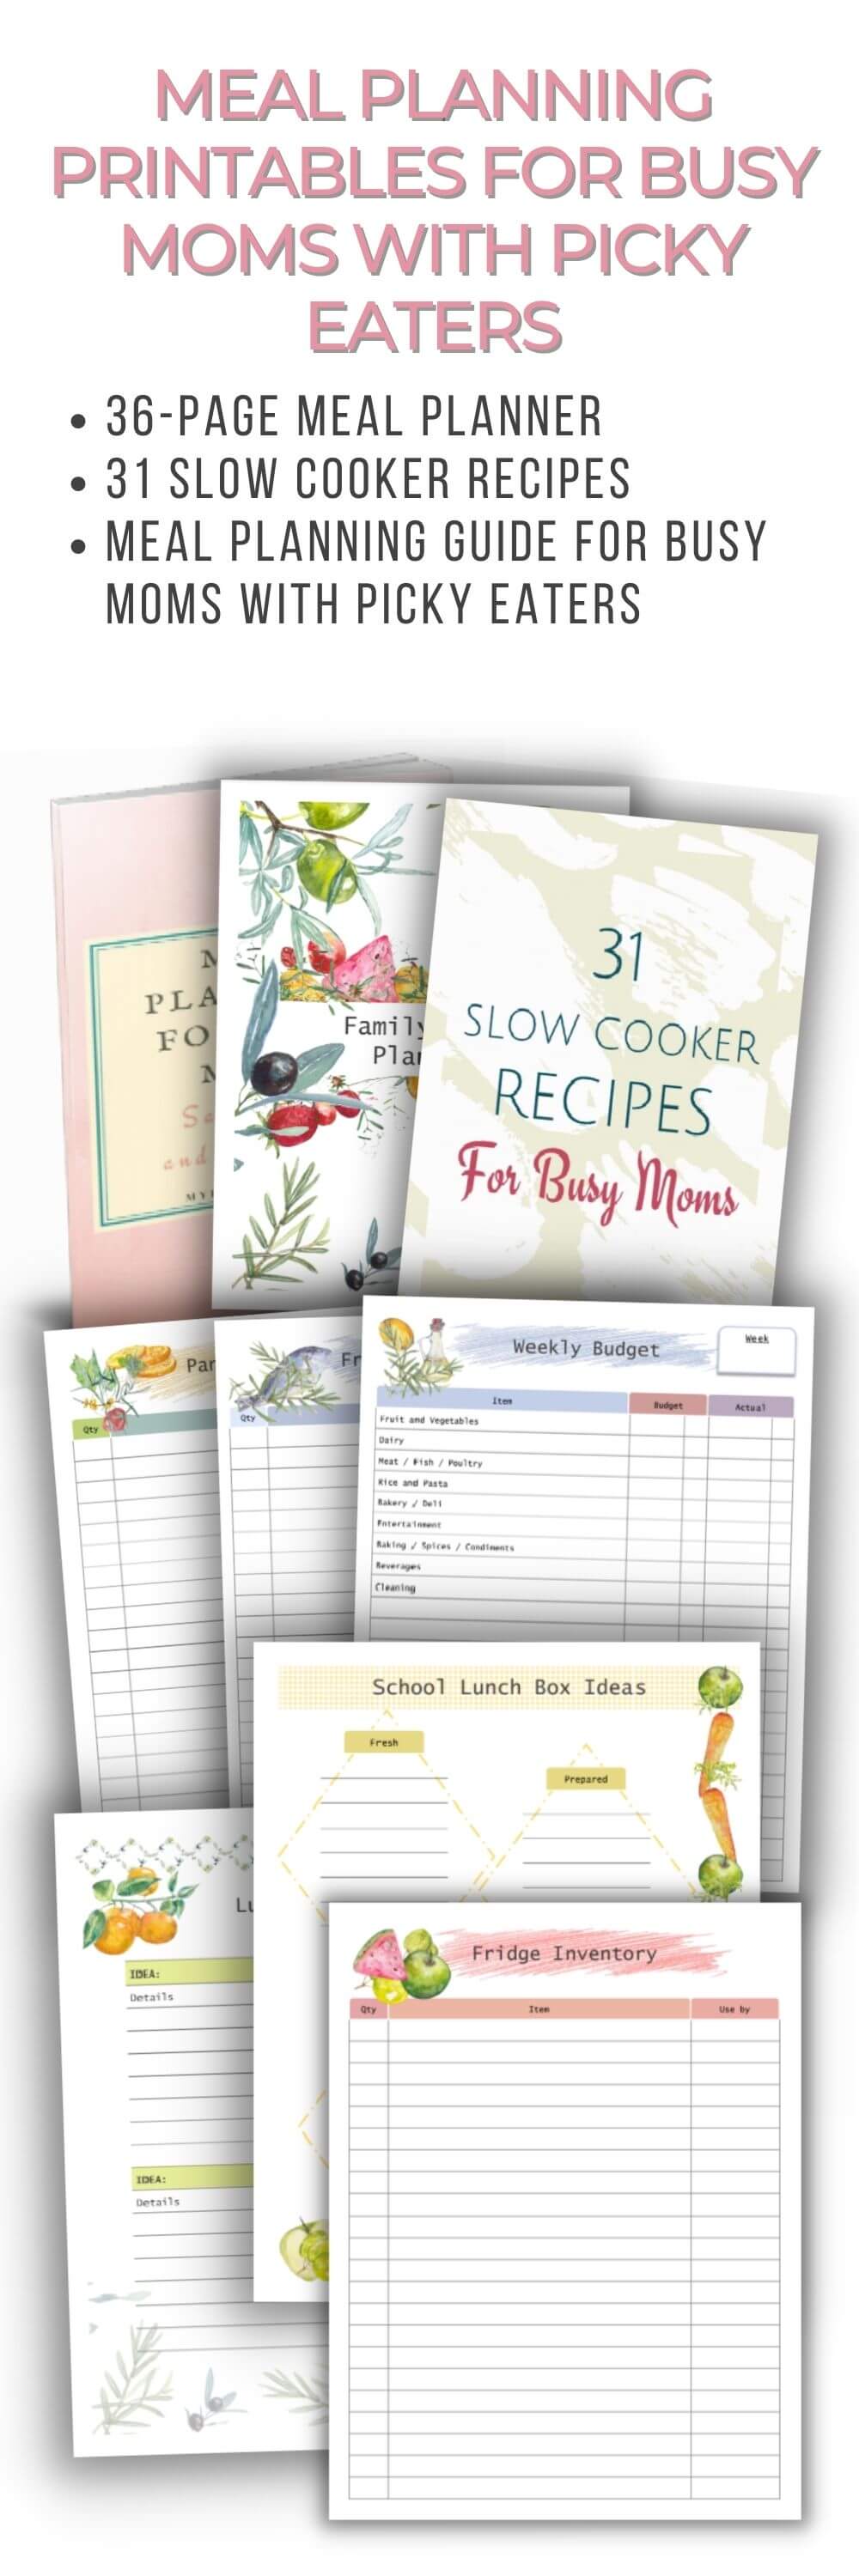 Meal planning binder and beginners guide. Meal planner, slow cooker recipes and pdf guides